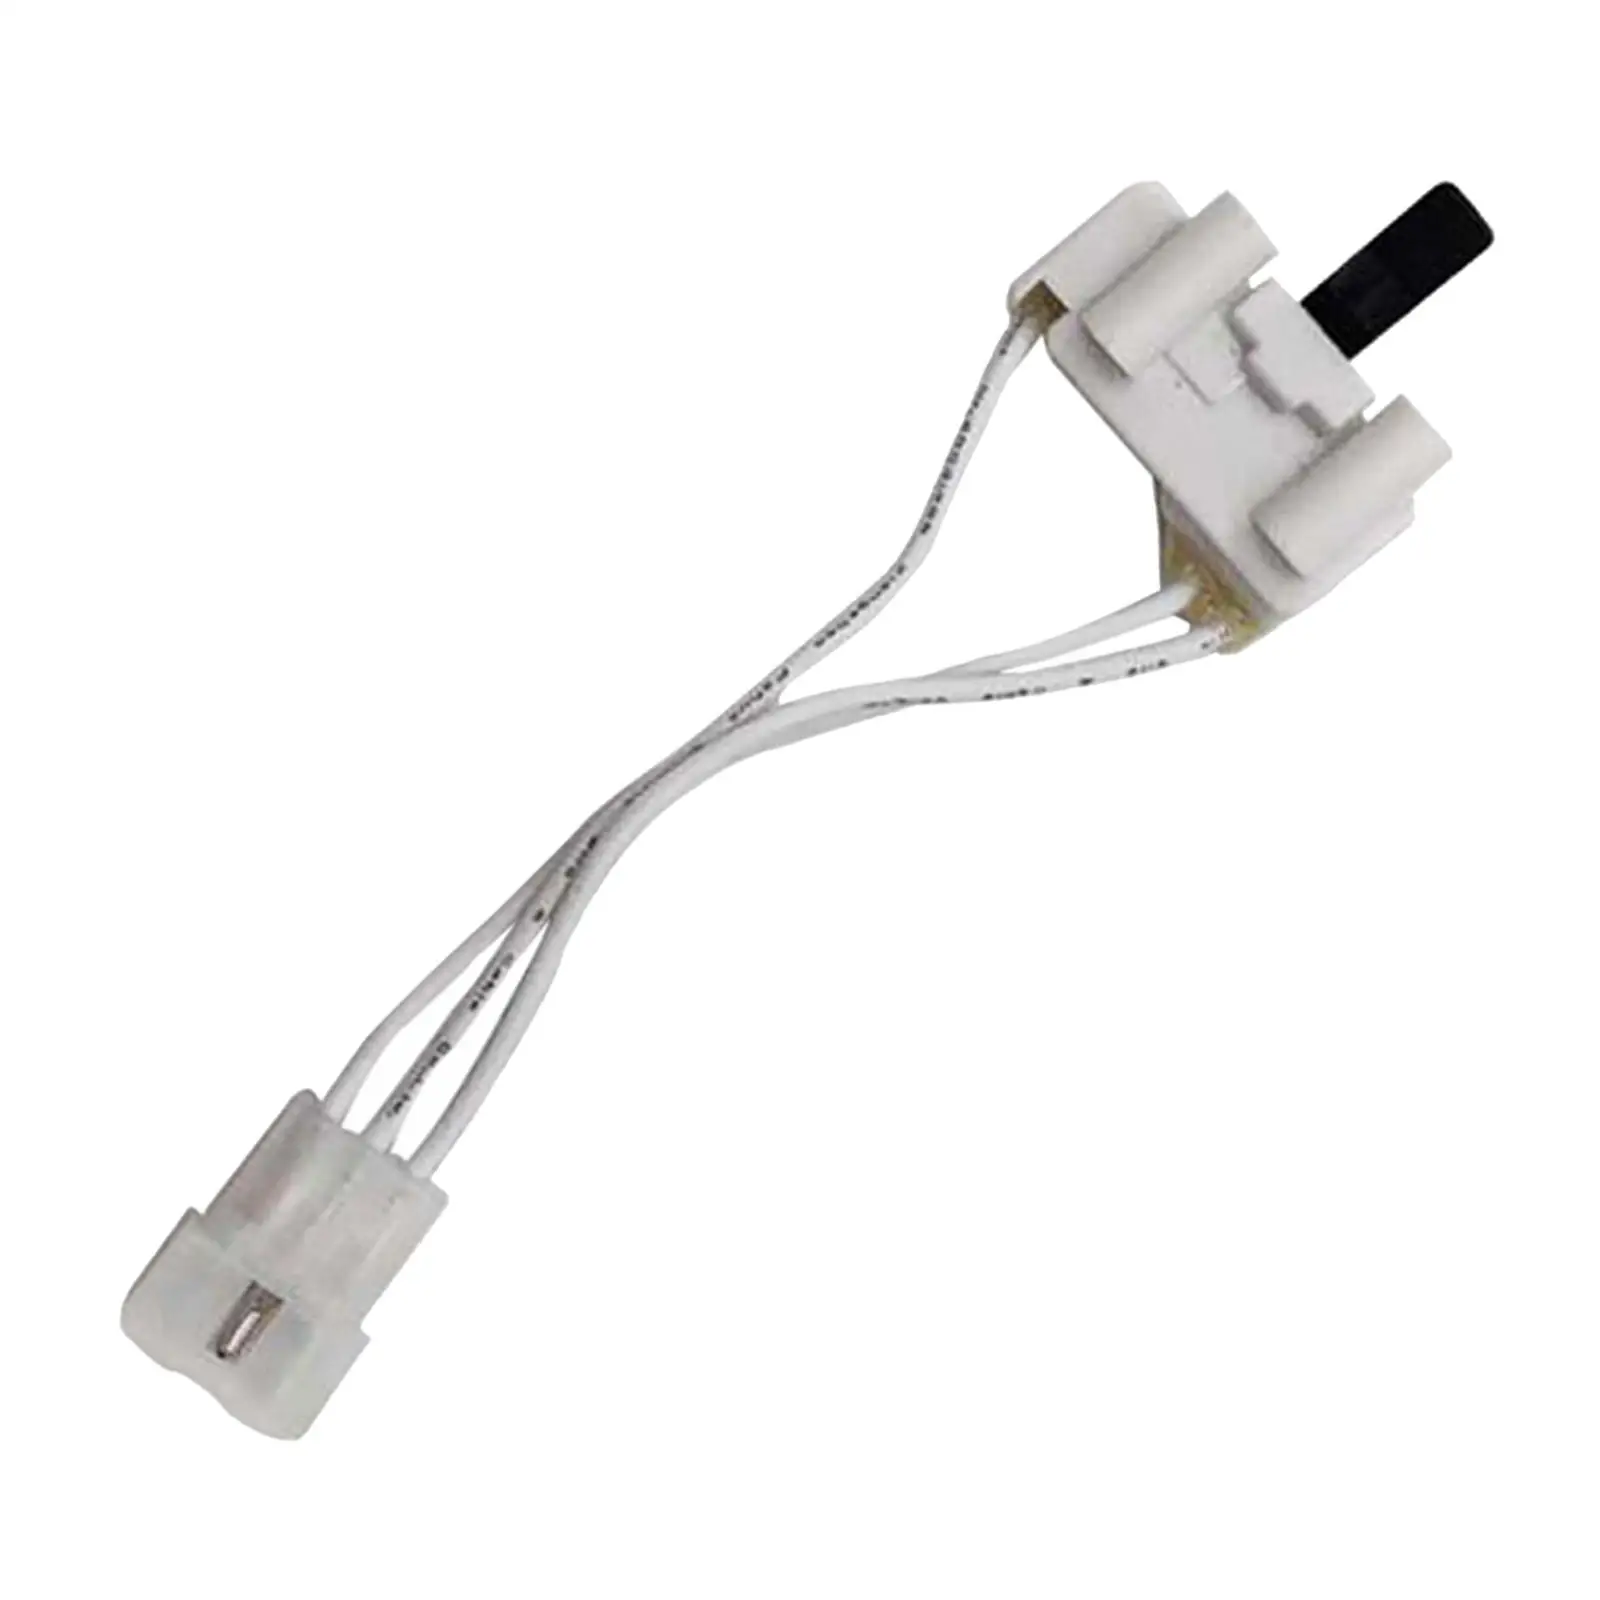 Door Switch Replacement Washing Machine Switch Accessory for 3406107 Washer